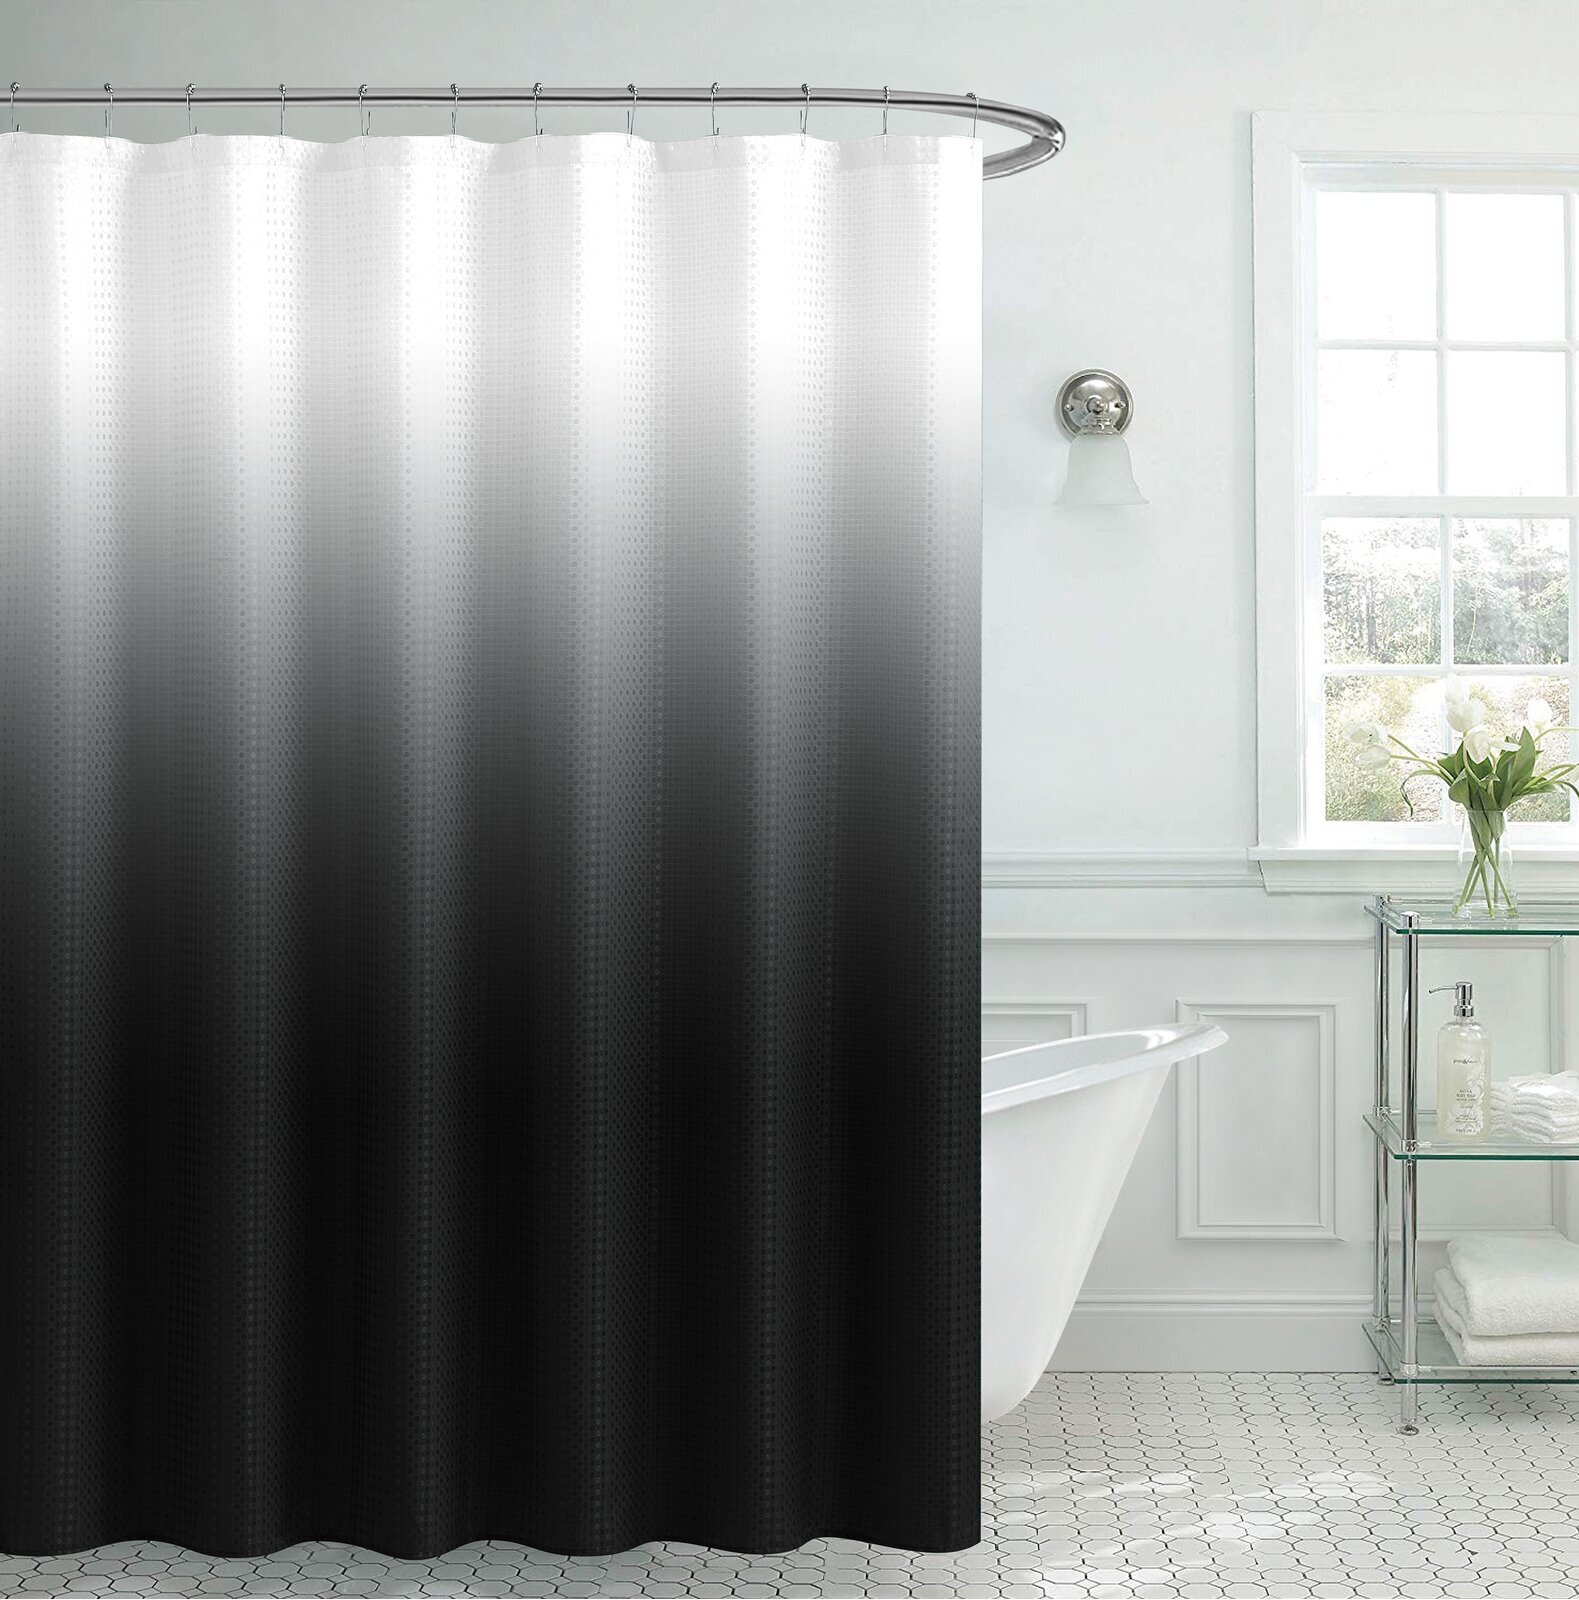 Black and white ombre shower curtain